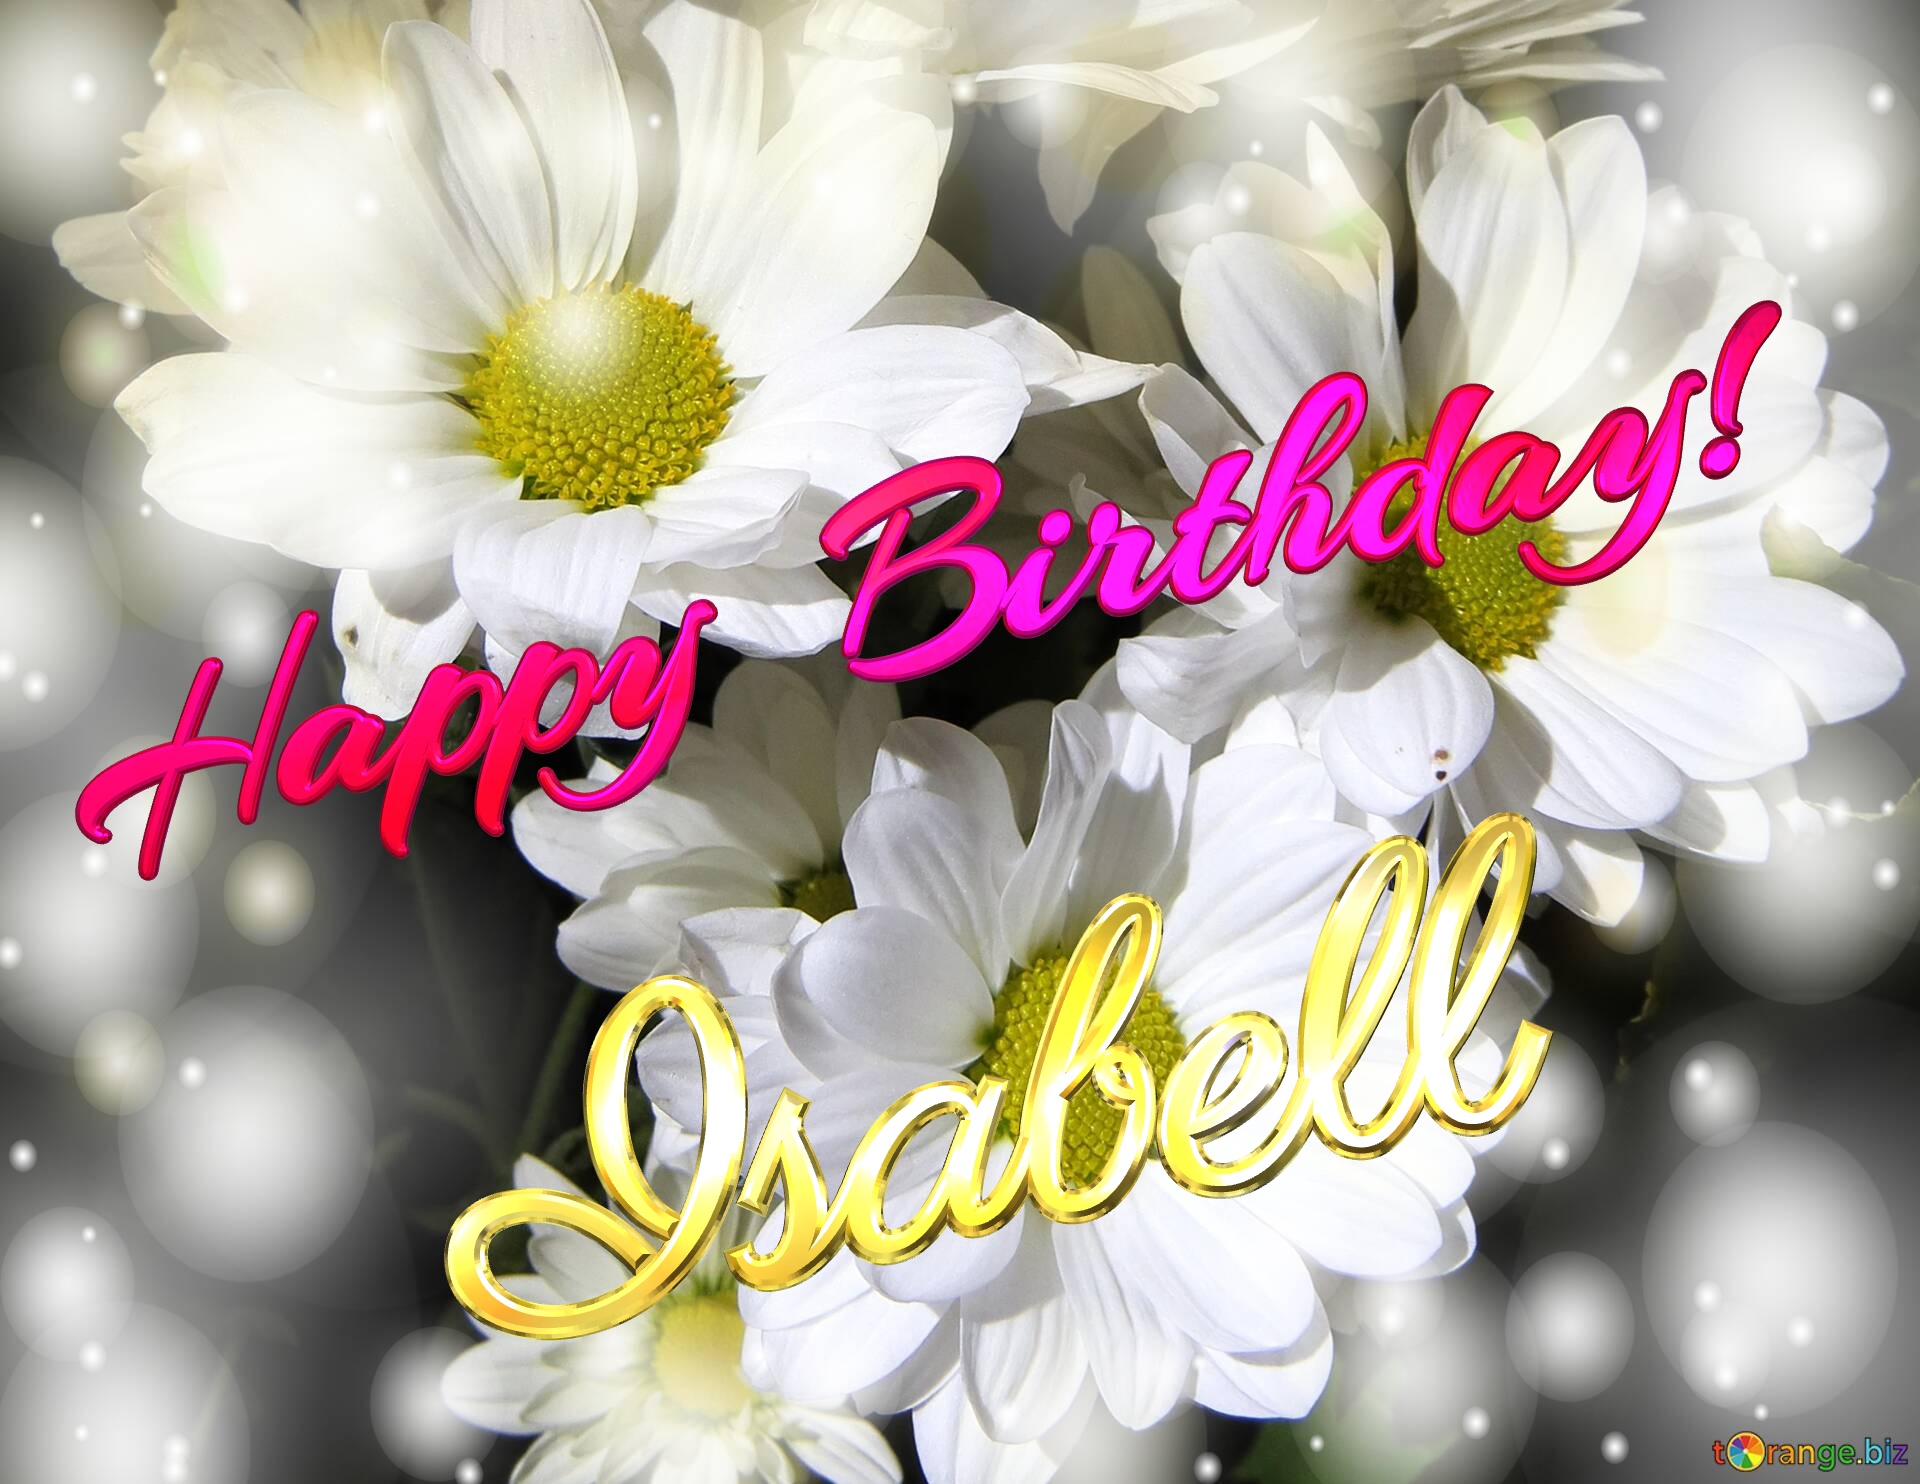 Isabell Happy Birthday! White flowers background №0